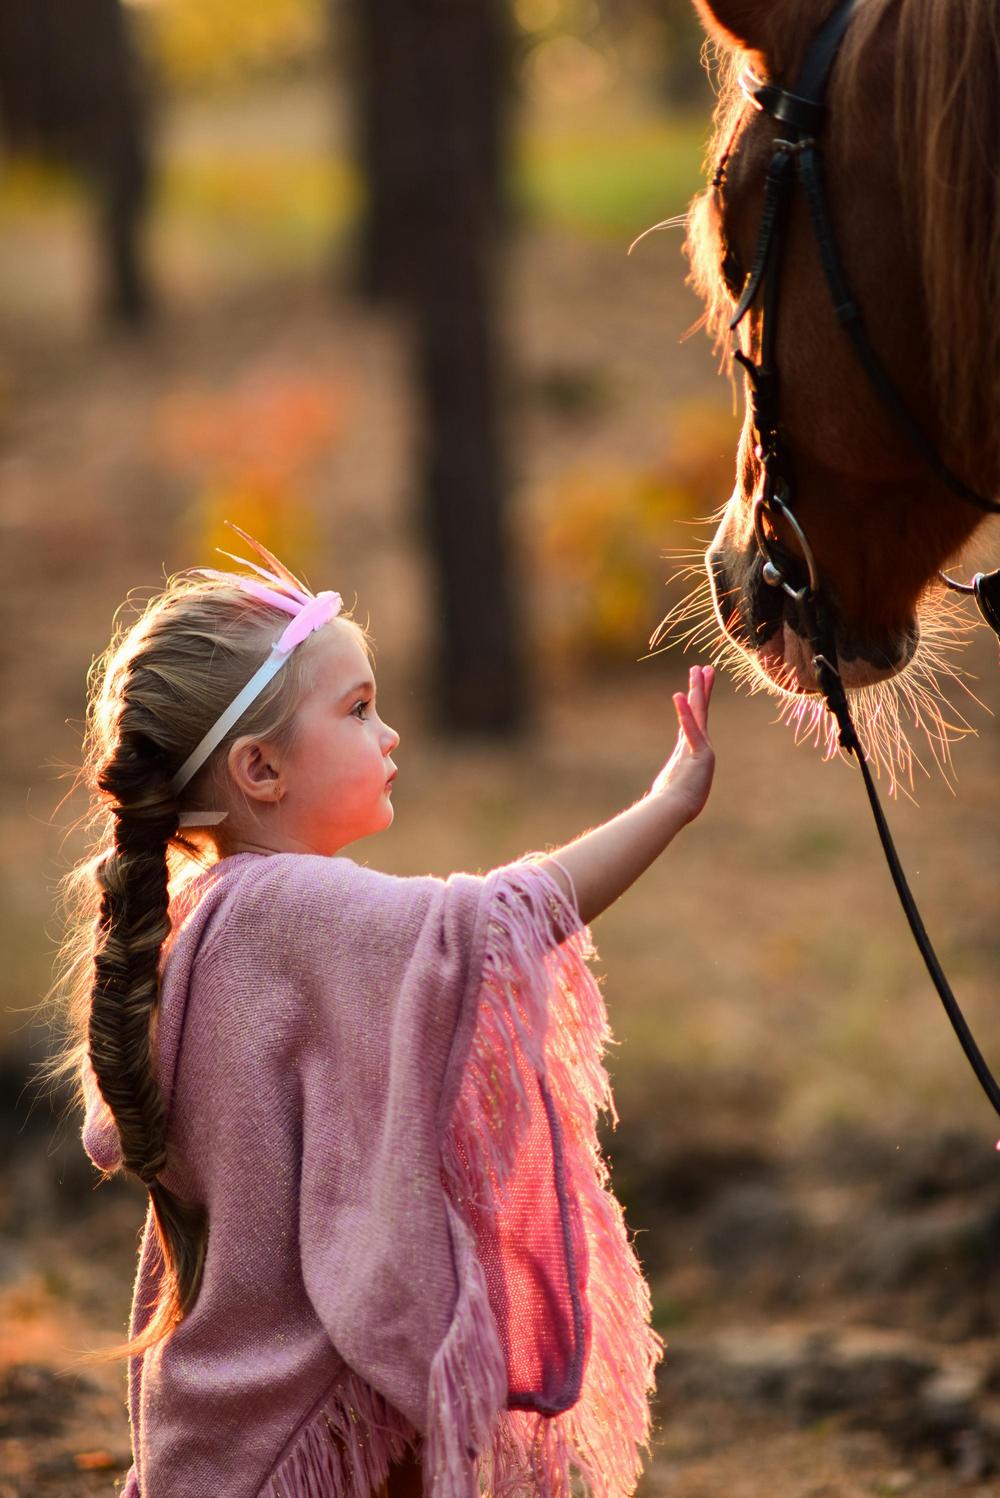 Charming little girl dressed like a princess stands with a horse in the autumn Naples forest